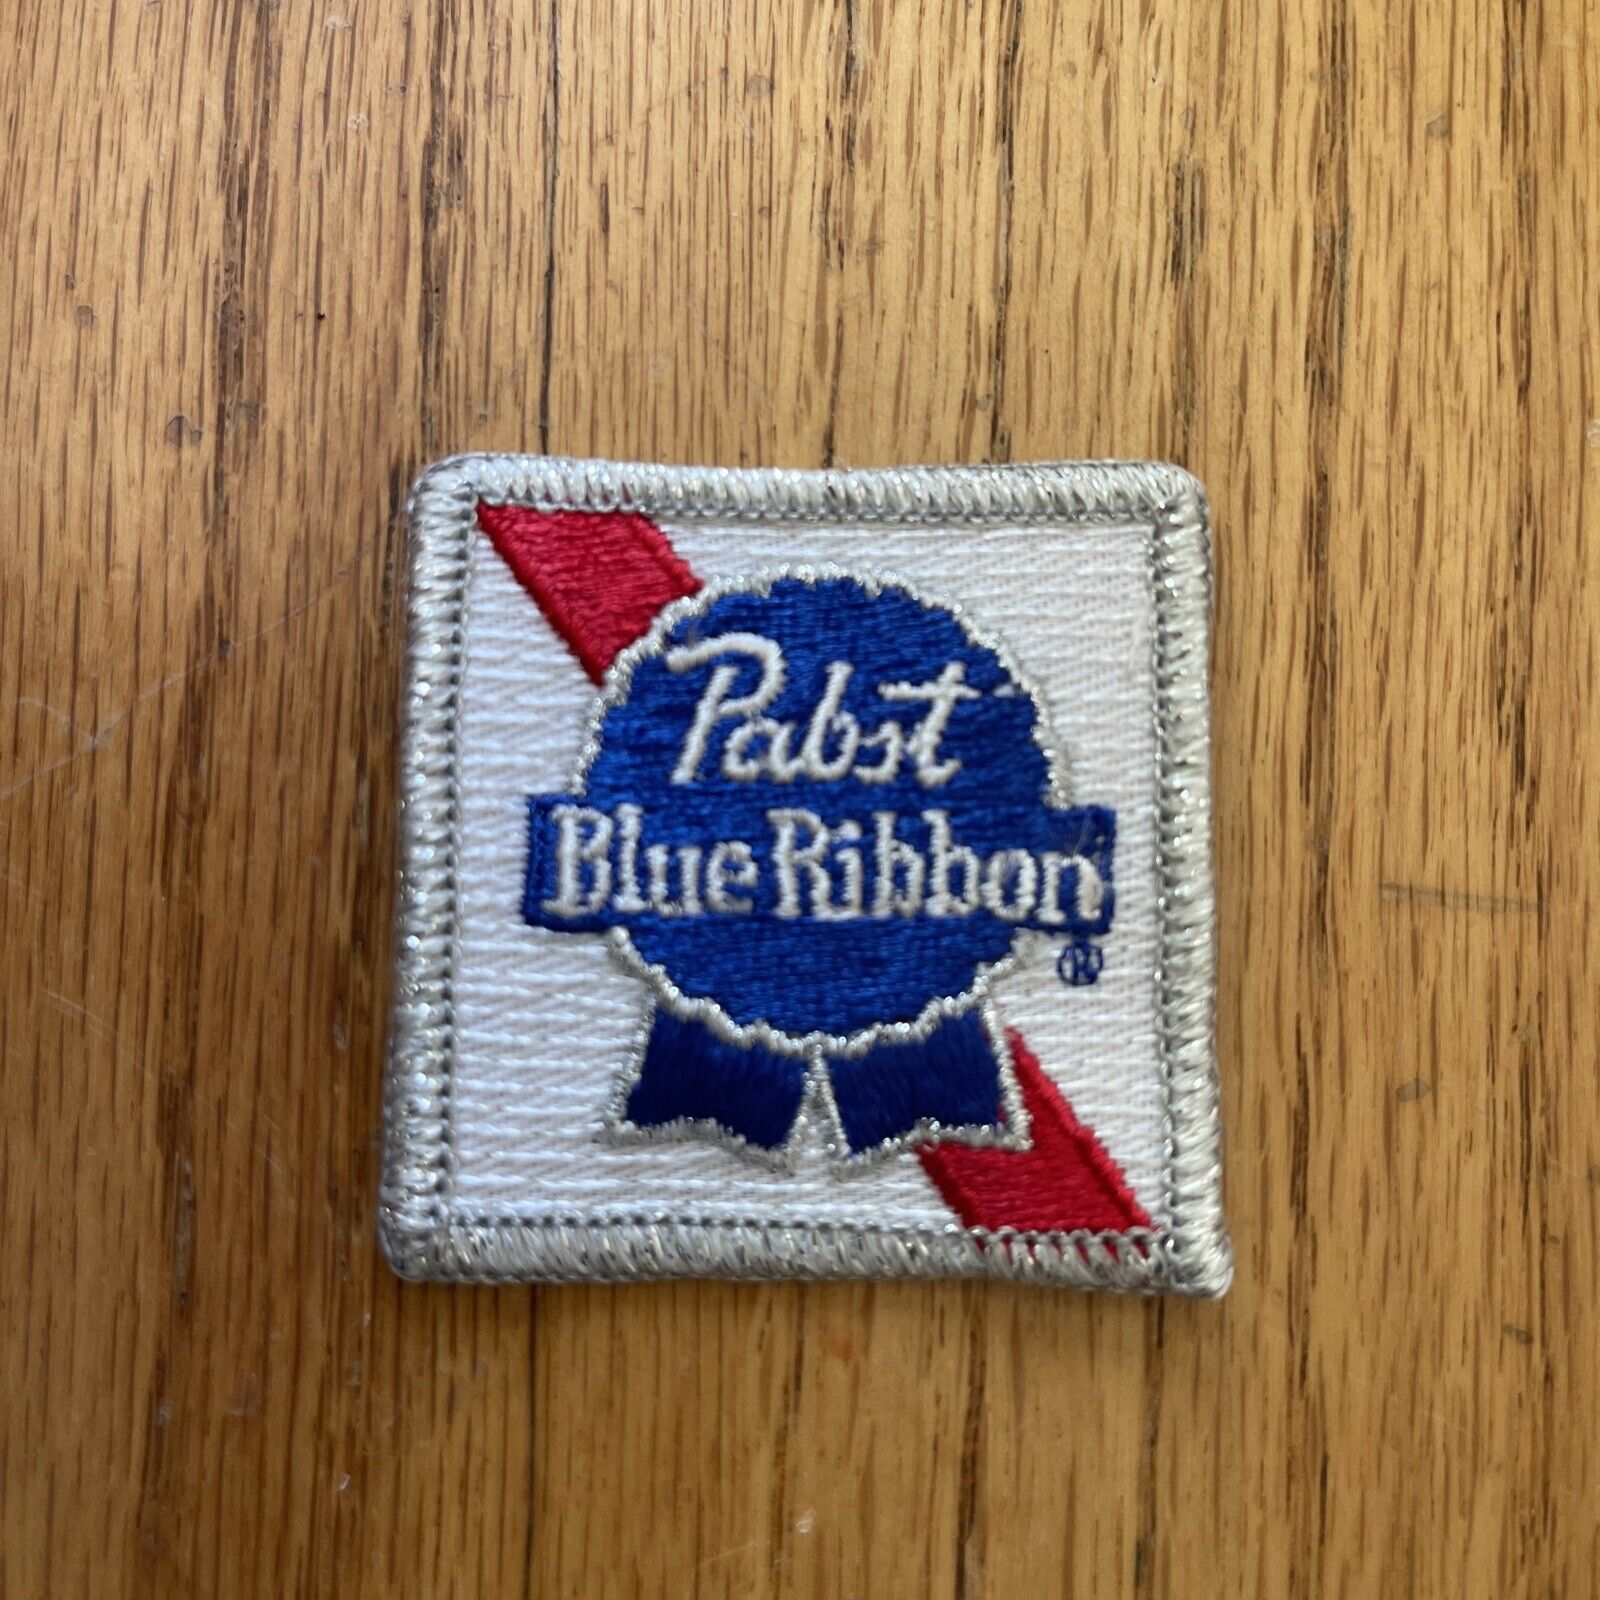 Vintage Pabst Blue Ribbon patch, sew on Pabst, Pabst Beer patch